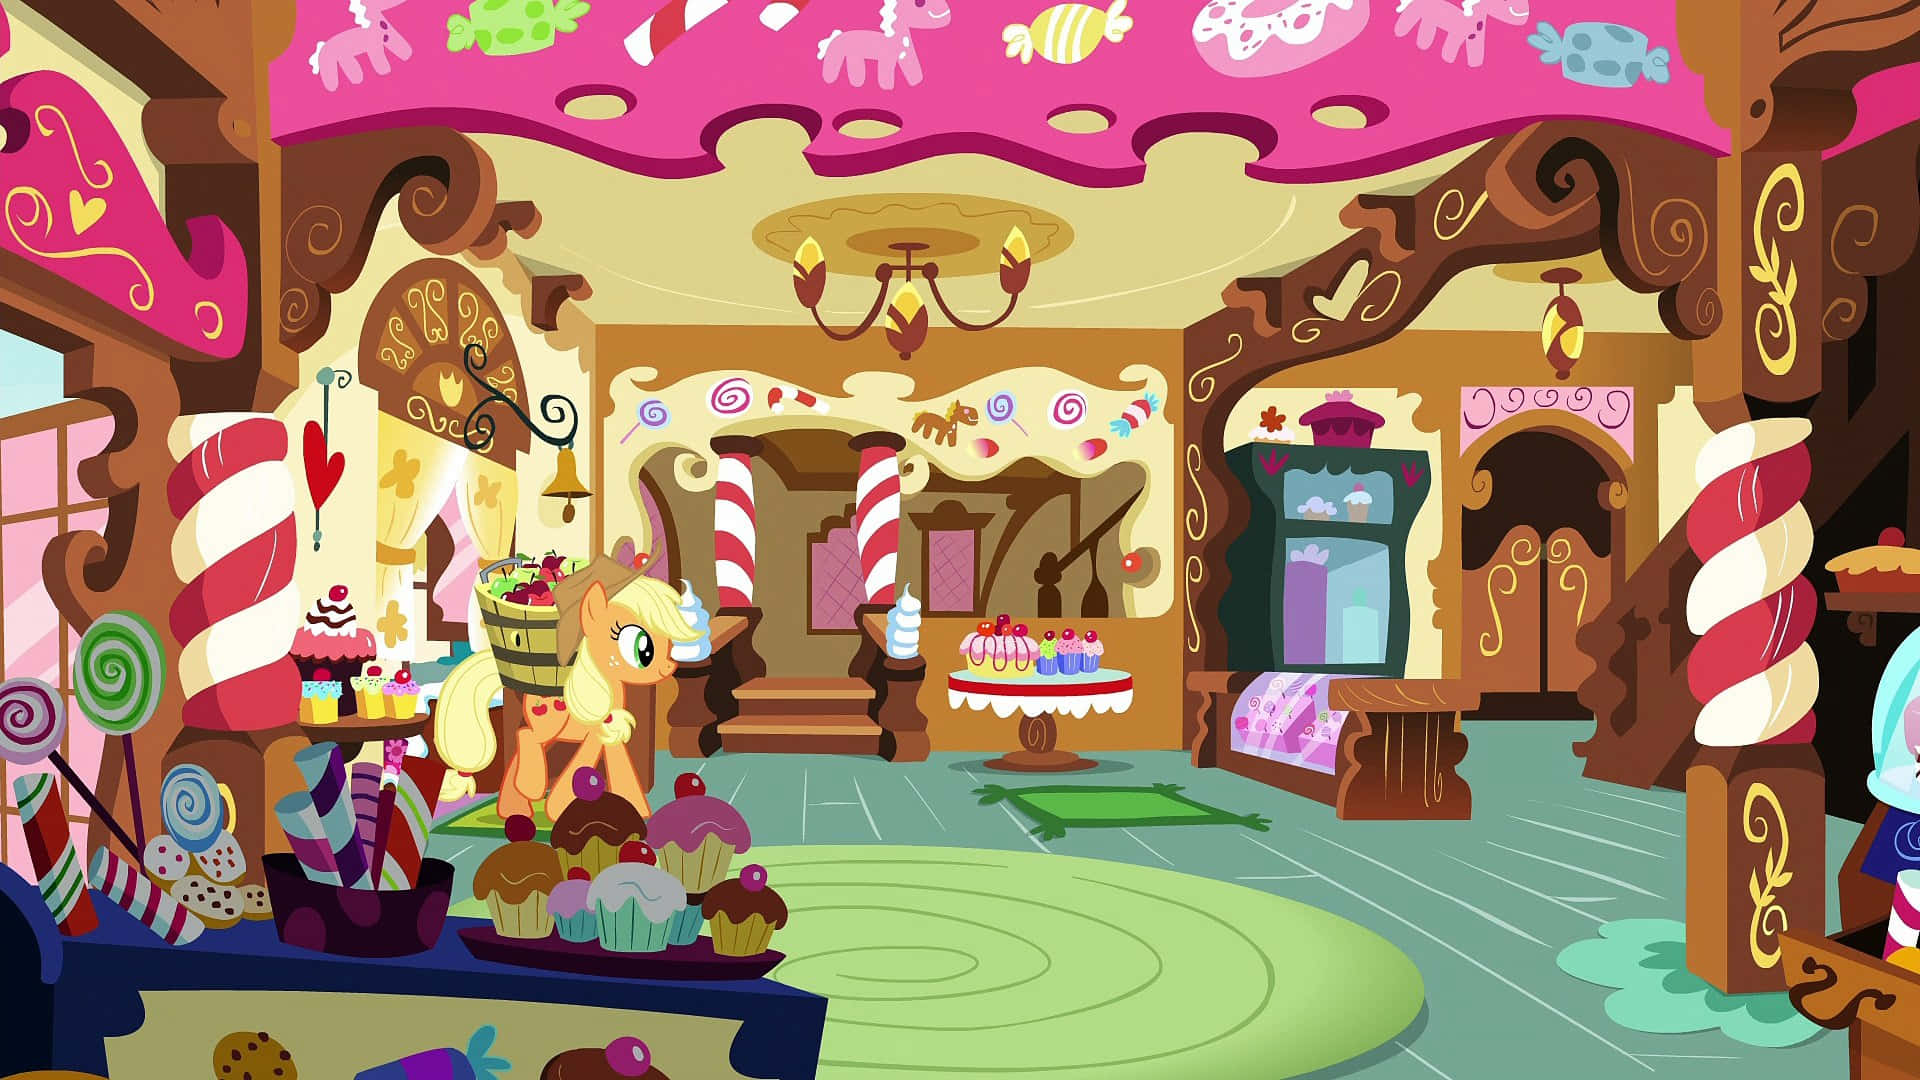 Unlock a world of fun with a Mlp Phone!